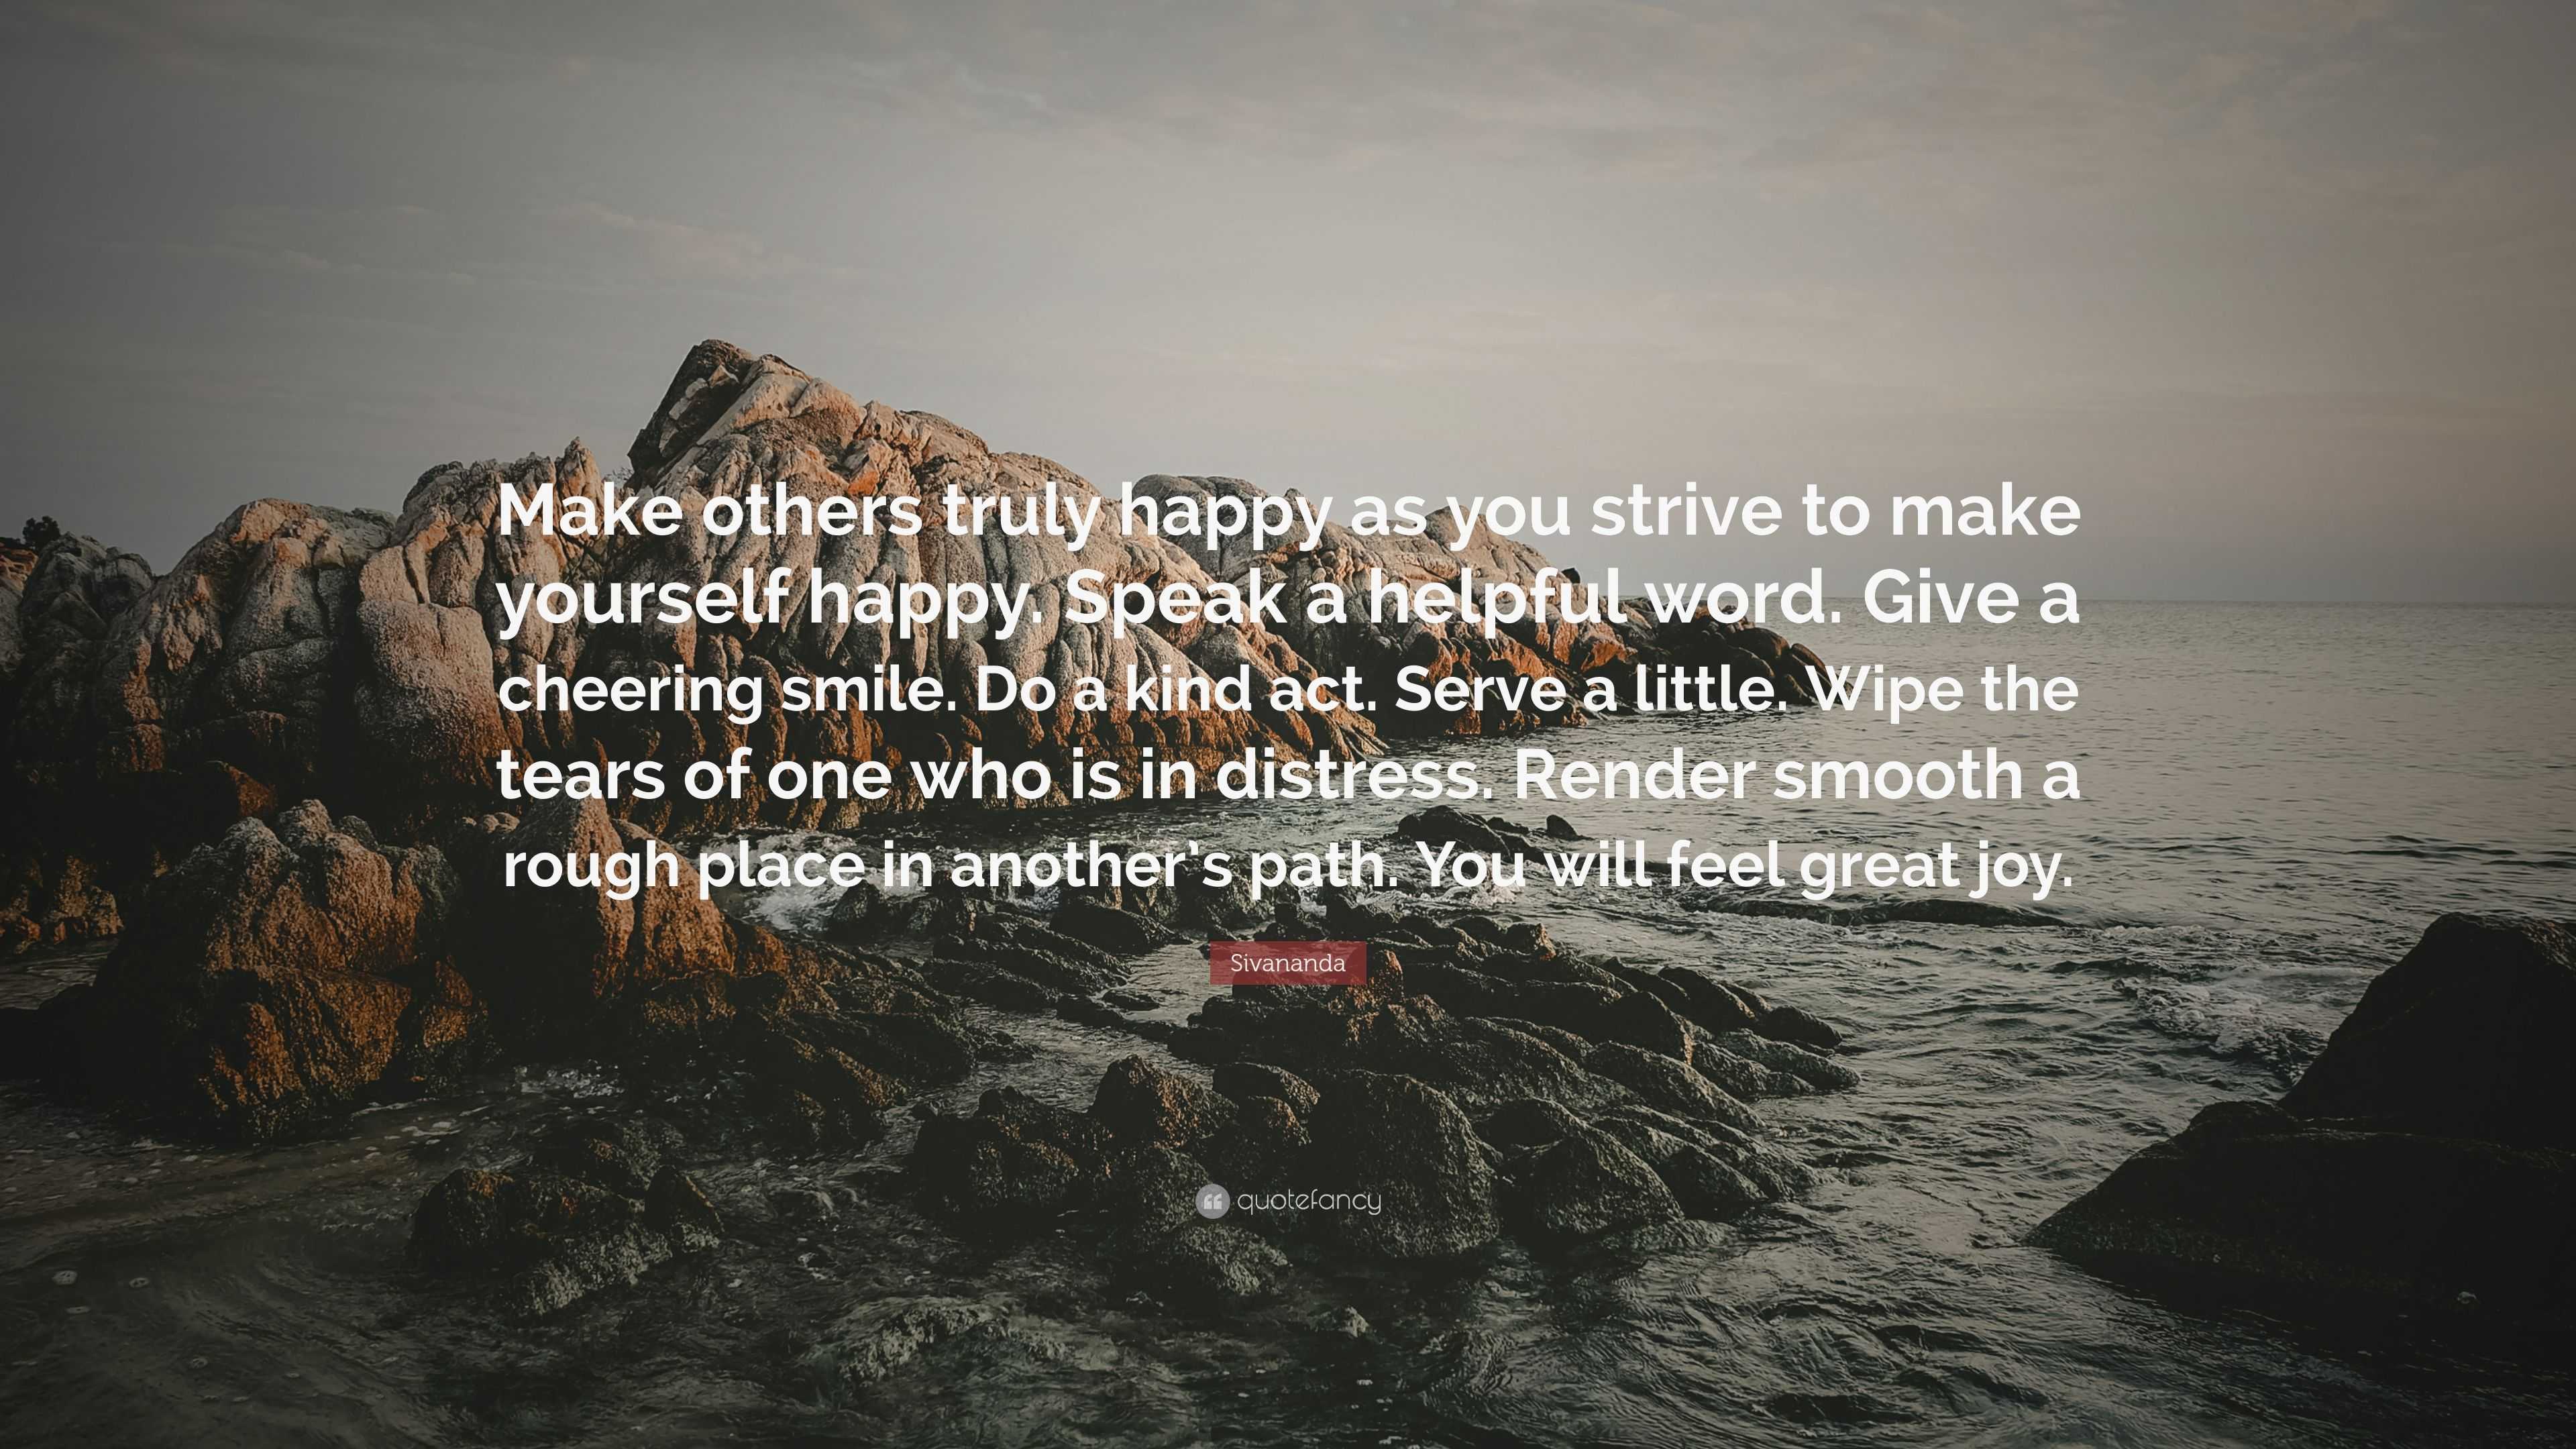 Sivananda Quote “Make others truly happy as you strive to make ...